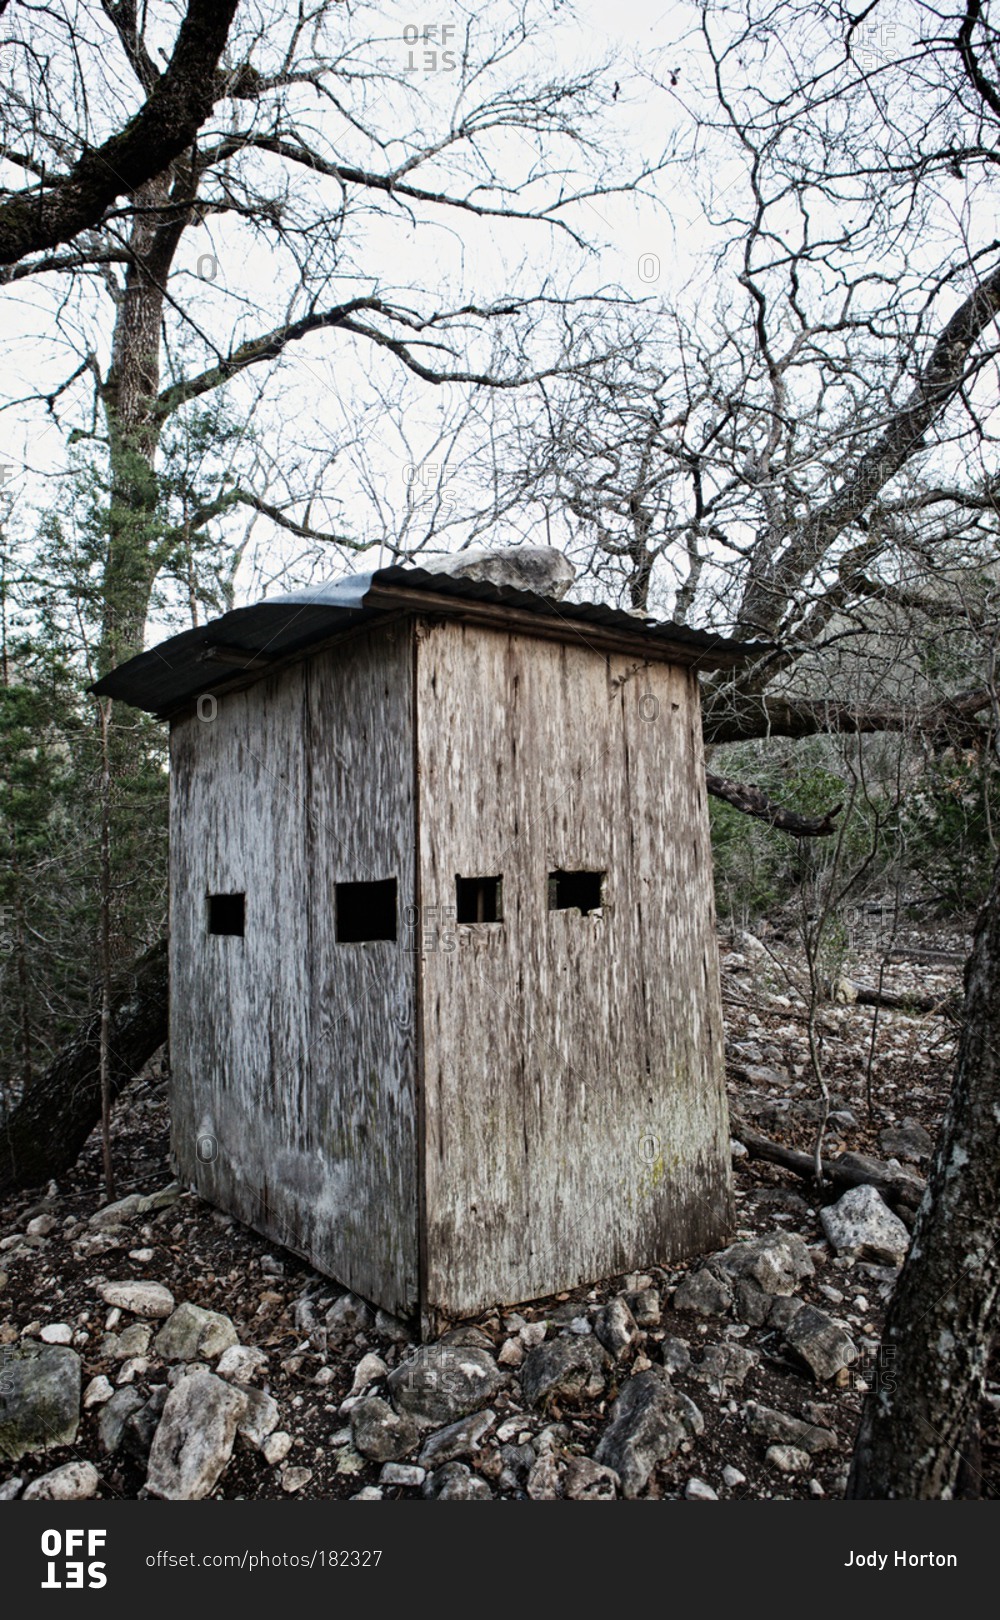 Hunting blind in a forest